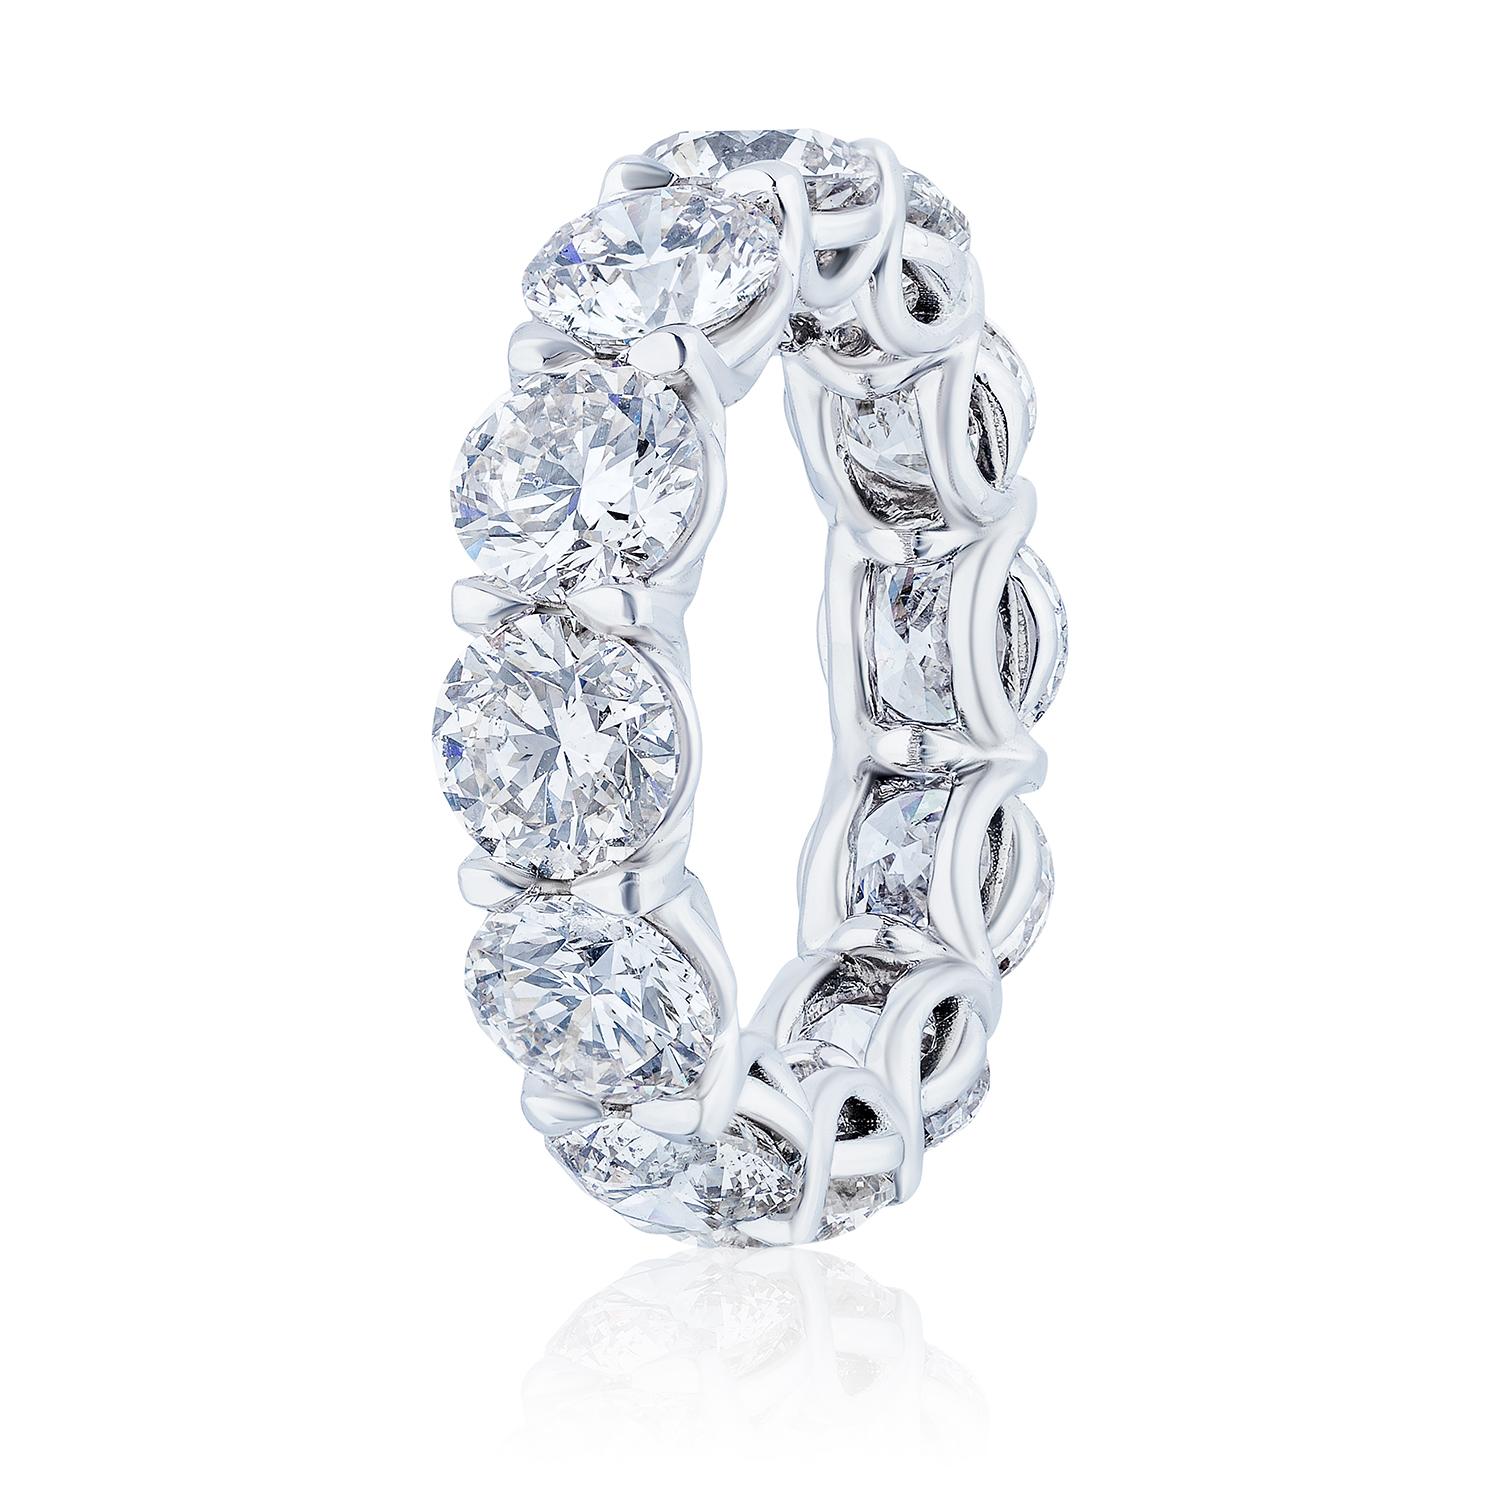 This beautiful Eternity Ring is set with 12 perfectly matched Round Brilliant Cut Diamonds, each weighing between 0.7ct to 0.72ct totaling 8.50 Carats. Made in New York City using Platinum 950. Fits US Size 6.25

Diamonds are of F-G color and VS